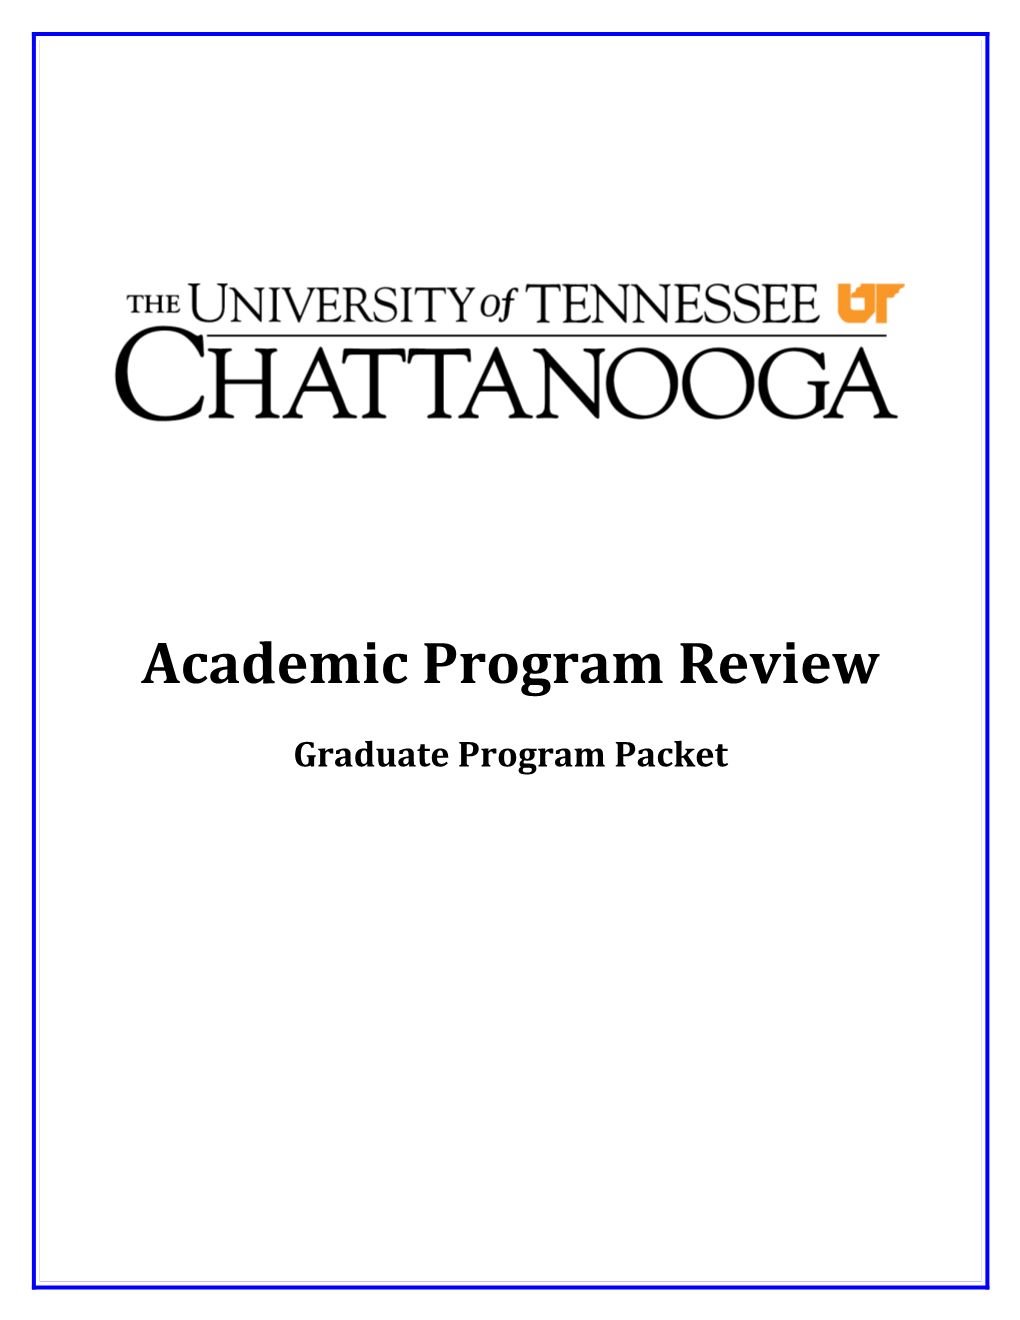 The University of Tennessee at Chattanooga s1